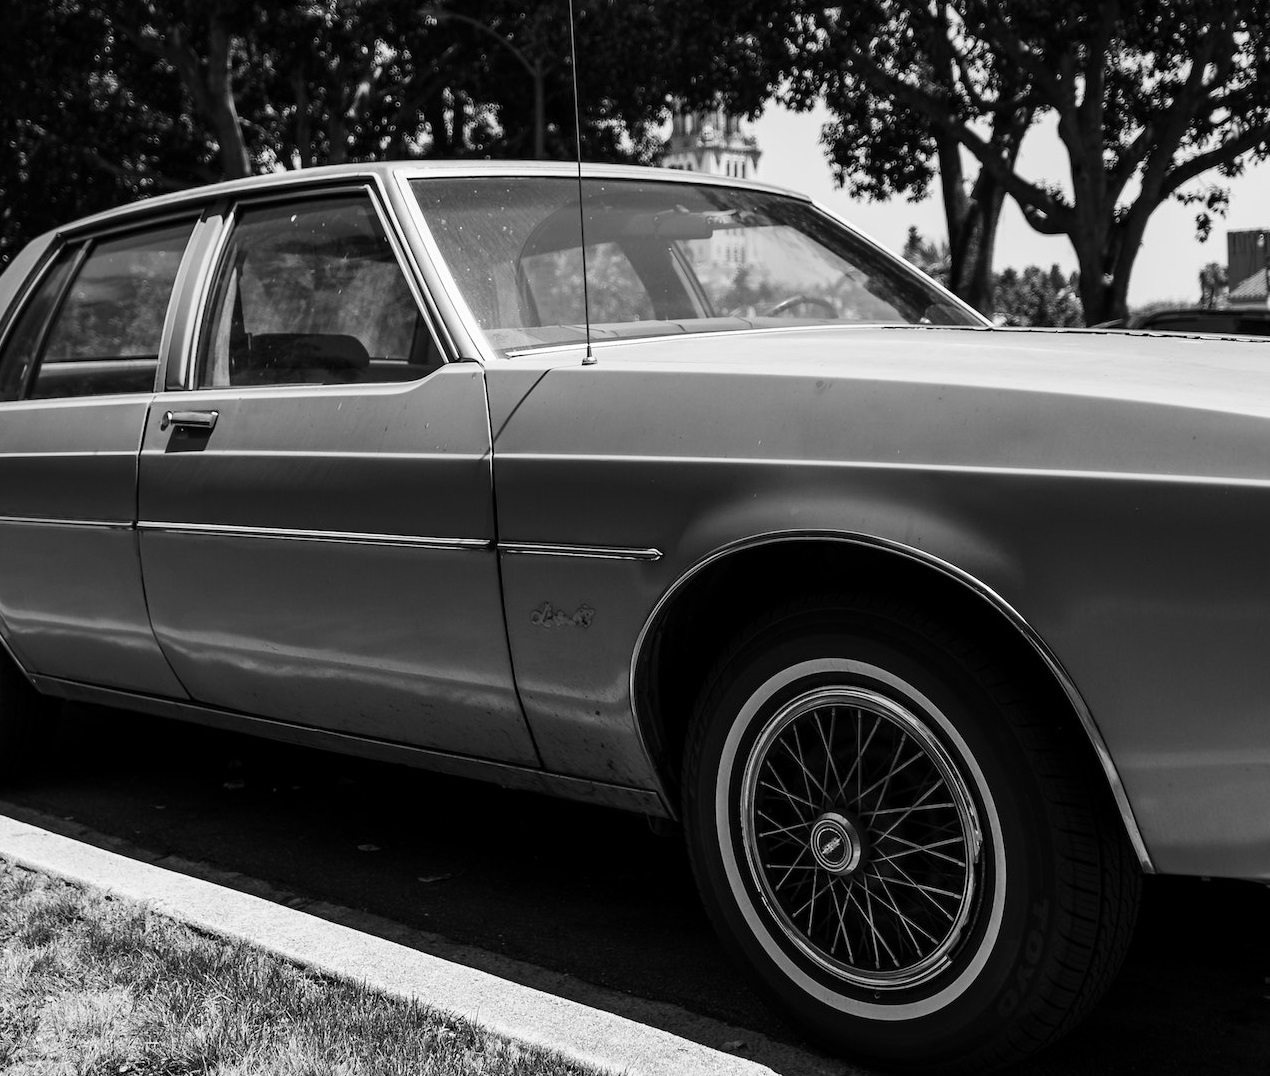 Black and White photo of a classic car | Veteran Car Donations